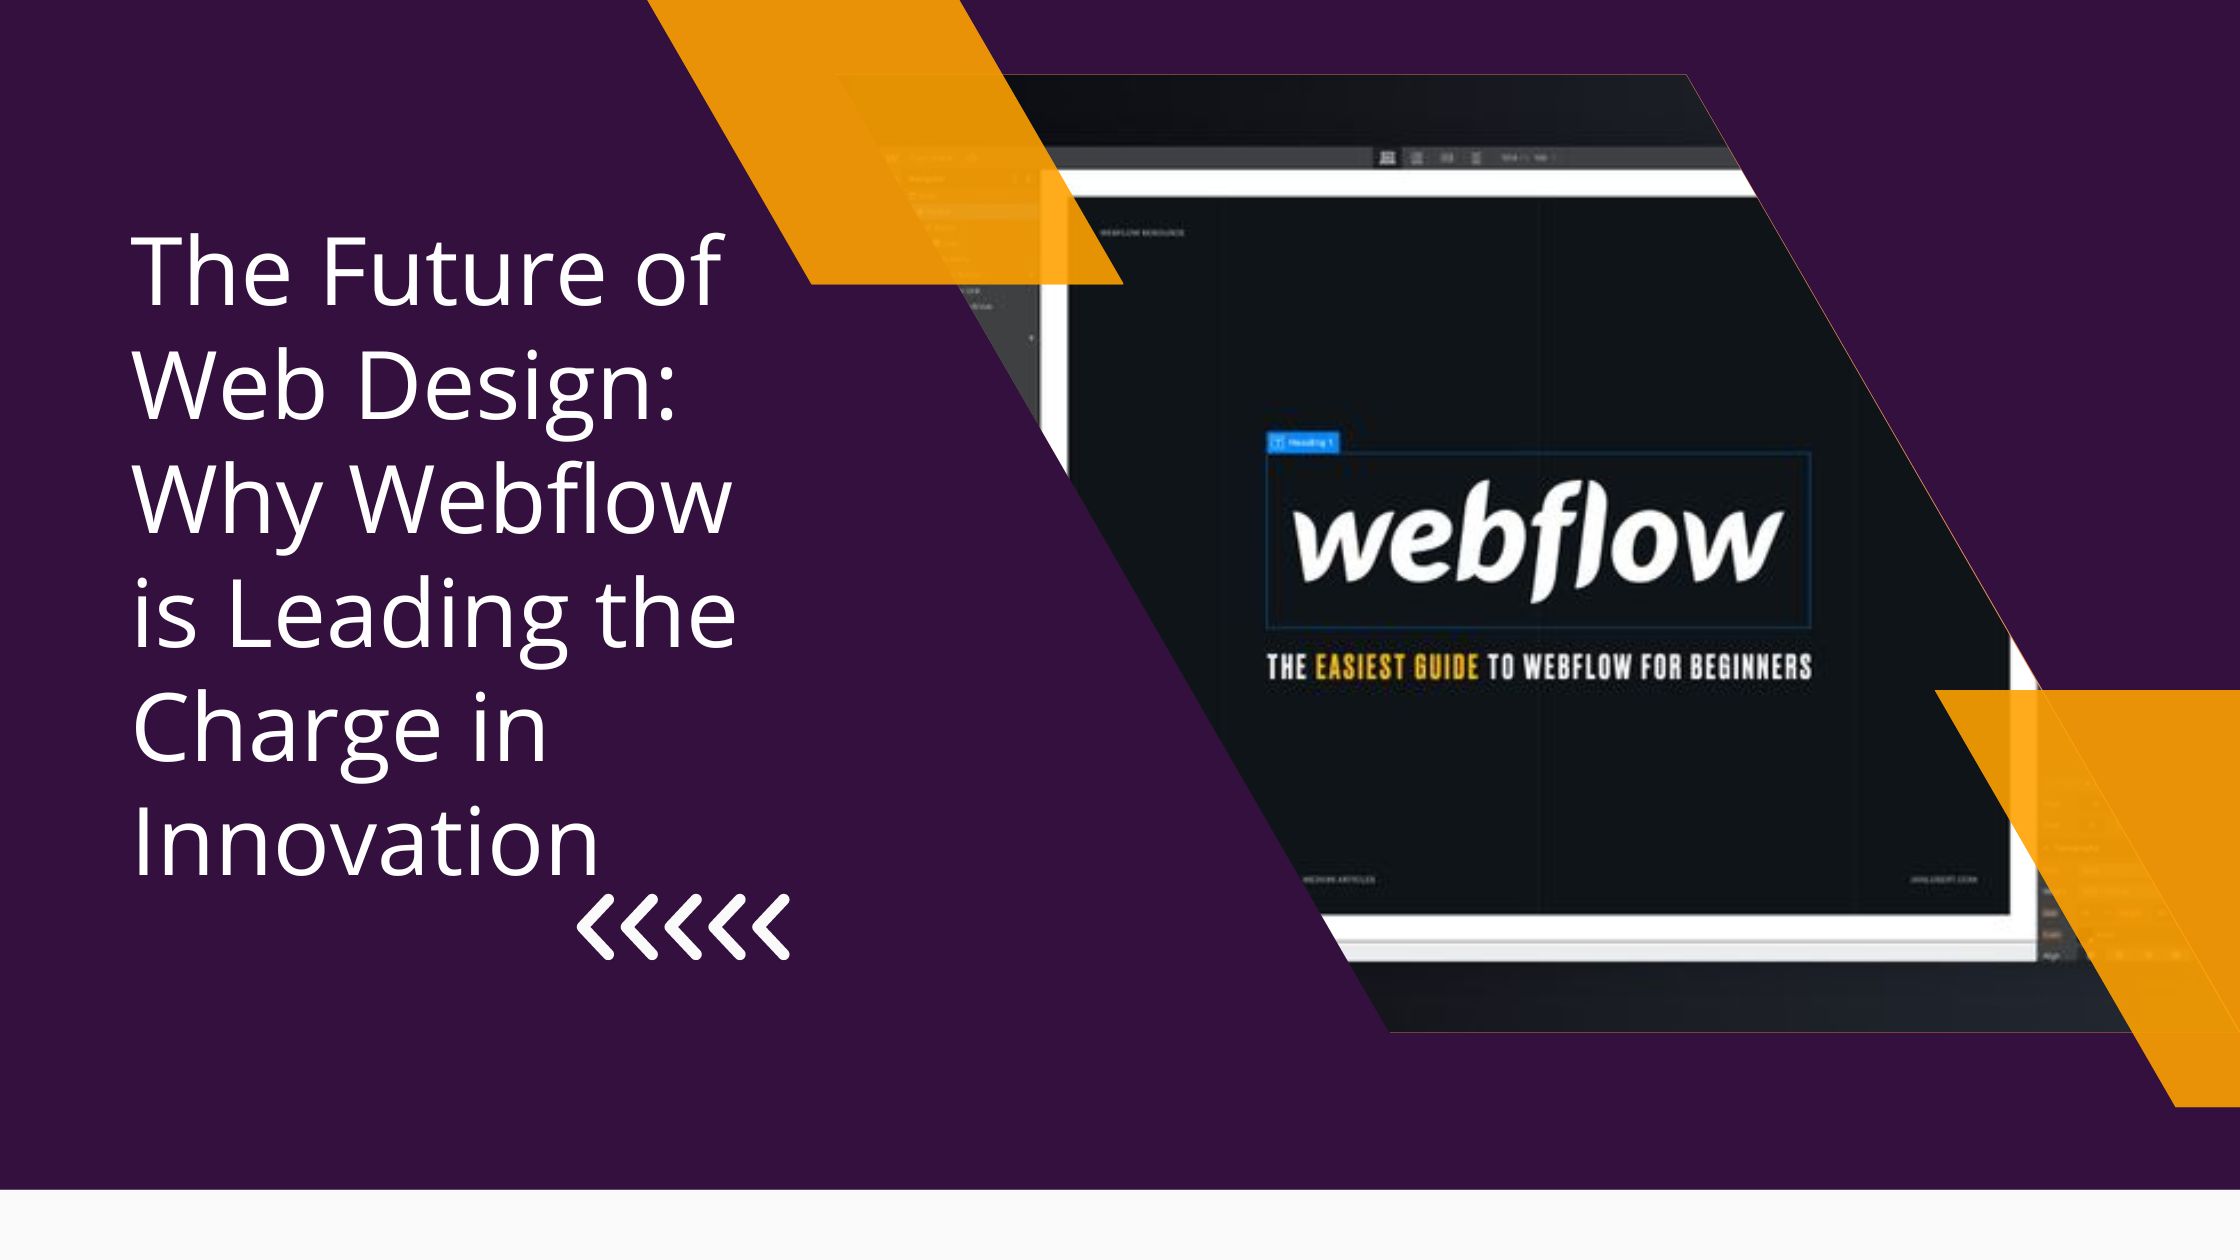 The Future of Web Design Why Webflow is Leading the Charge in Innovation